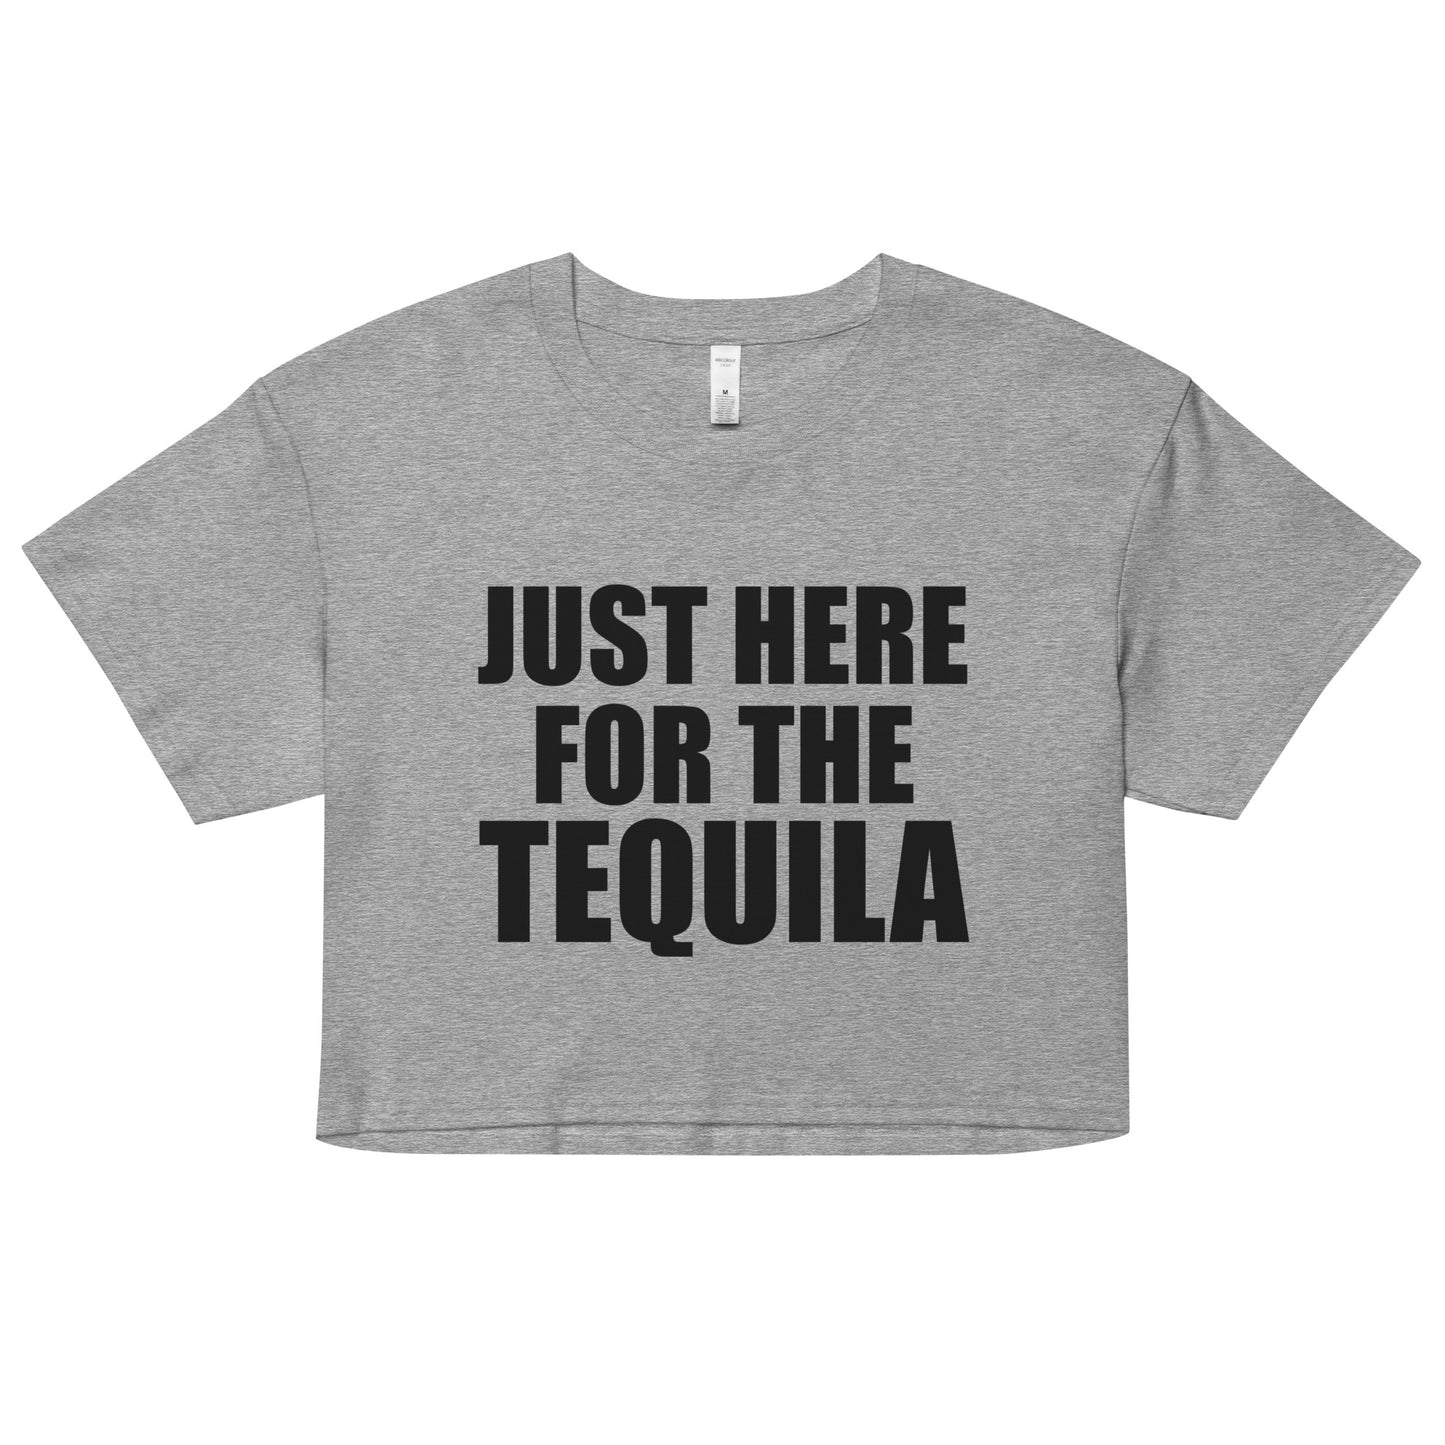 JUST HERE FOR THE TEQUILA / AND NONE OF THE BS - Women’s crop top